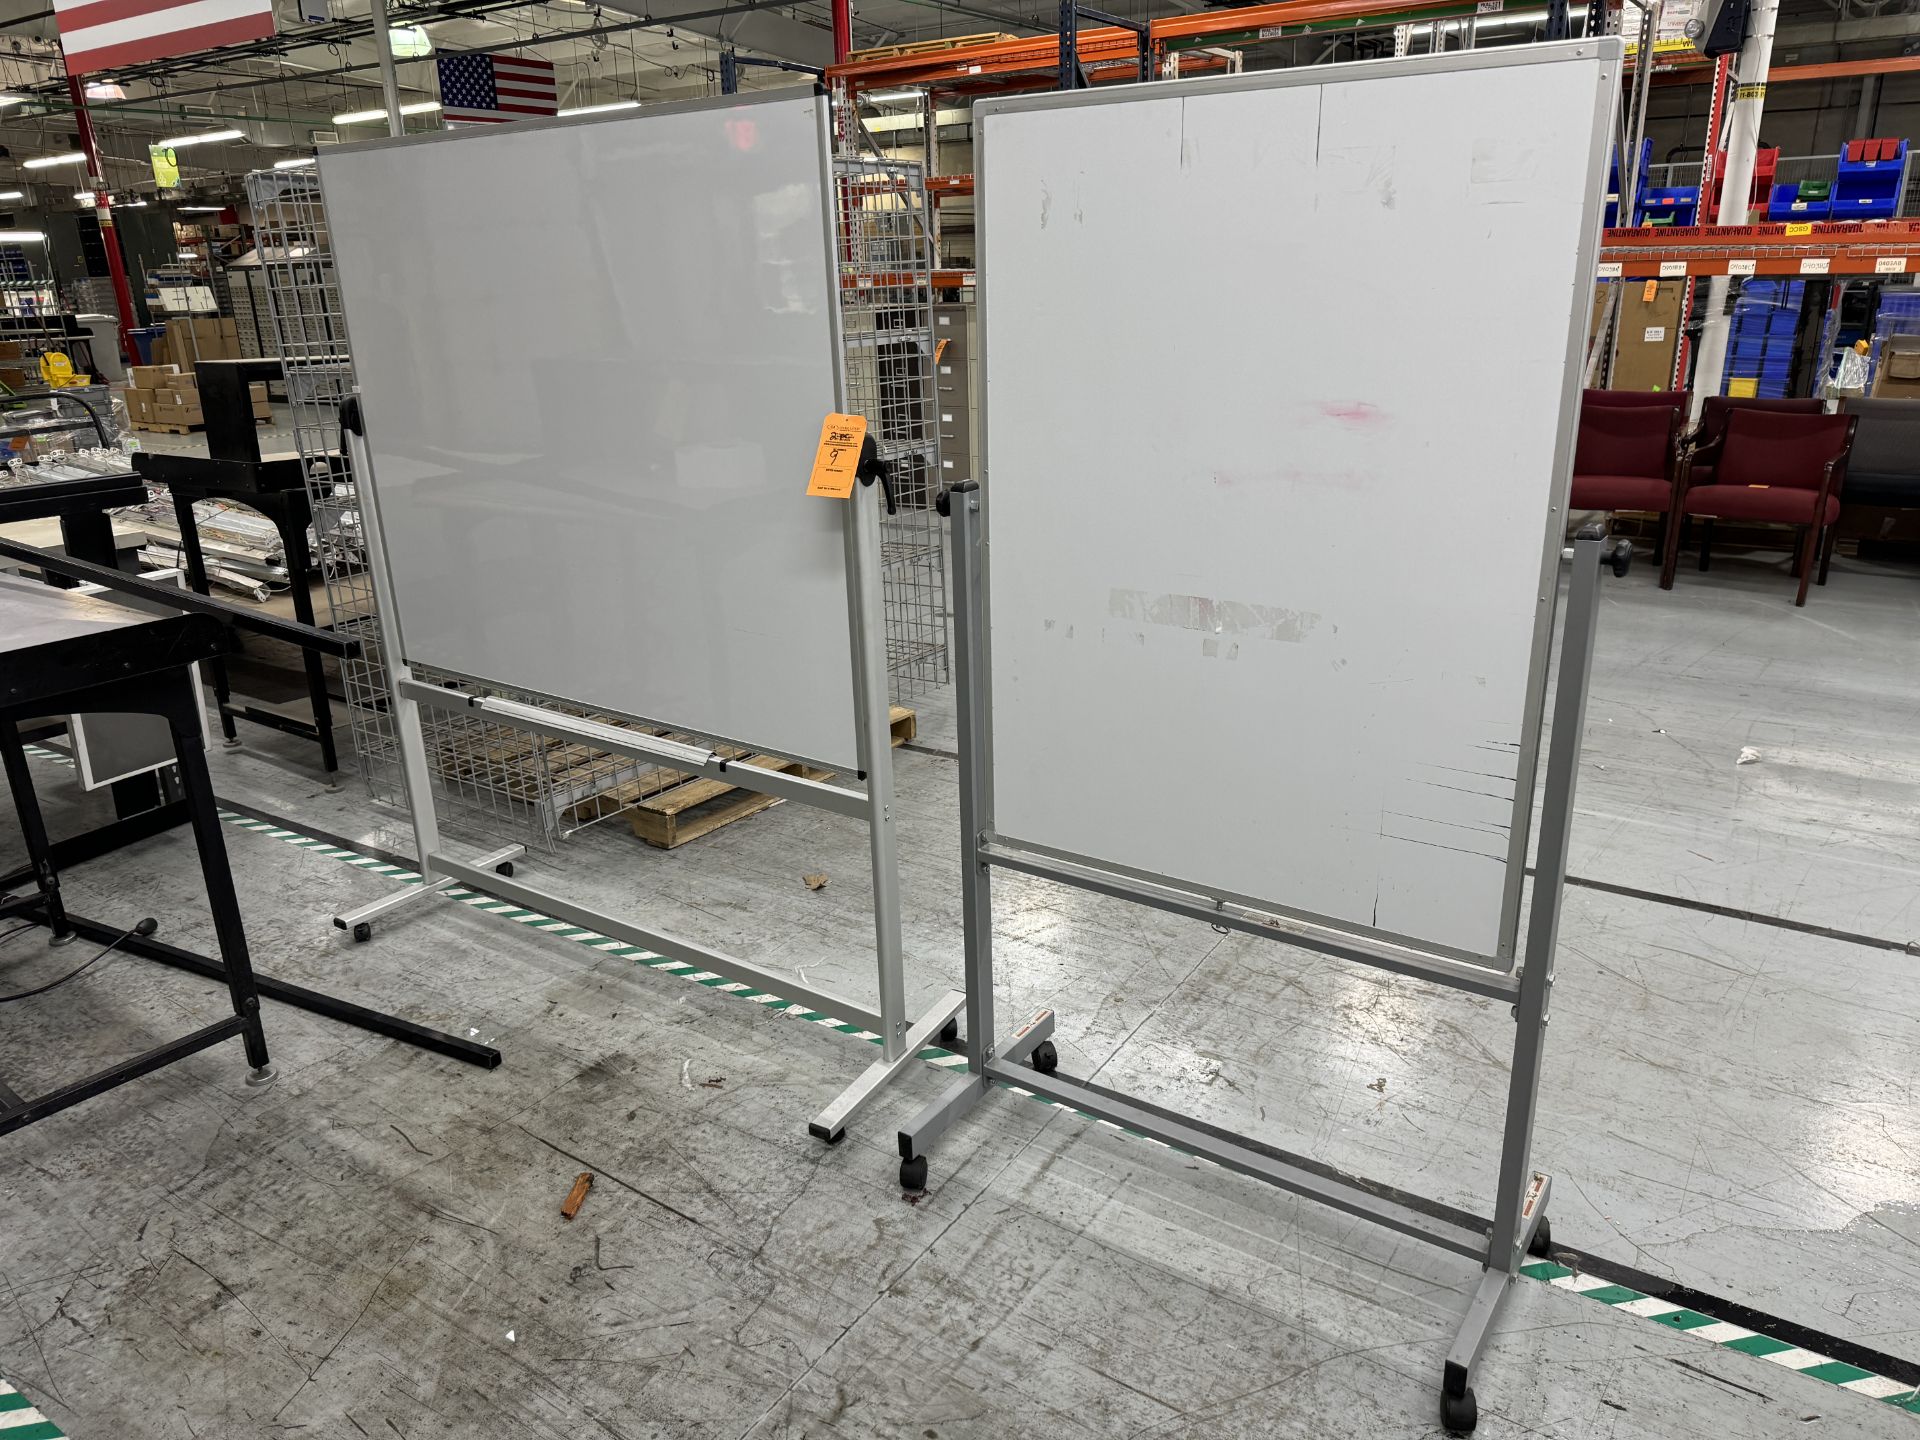 (2) WHITE BOARDS ON ROLLING STAND